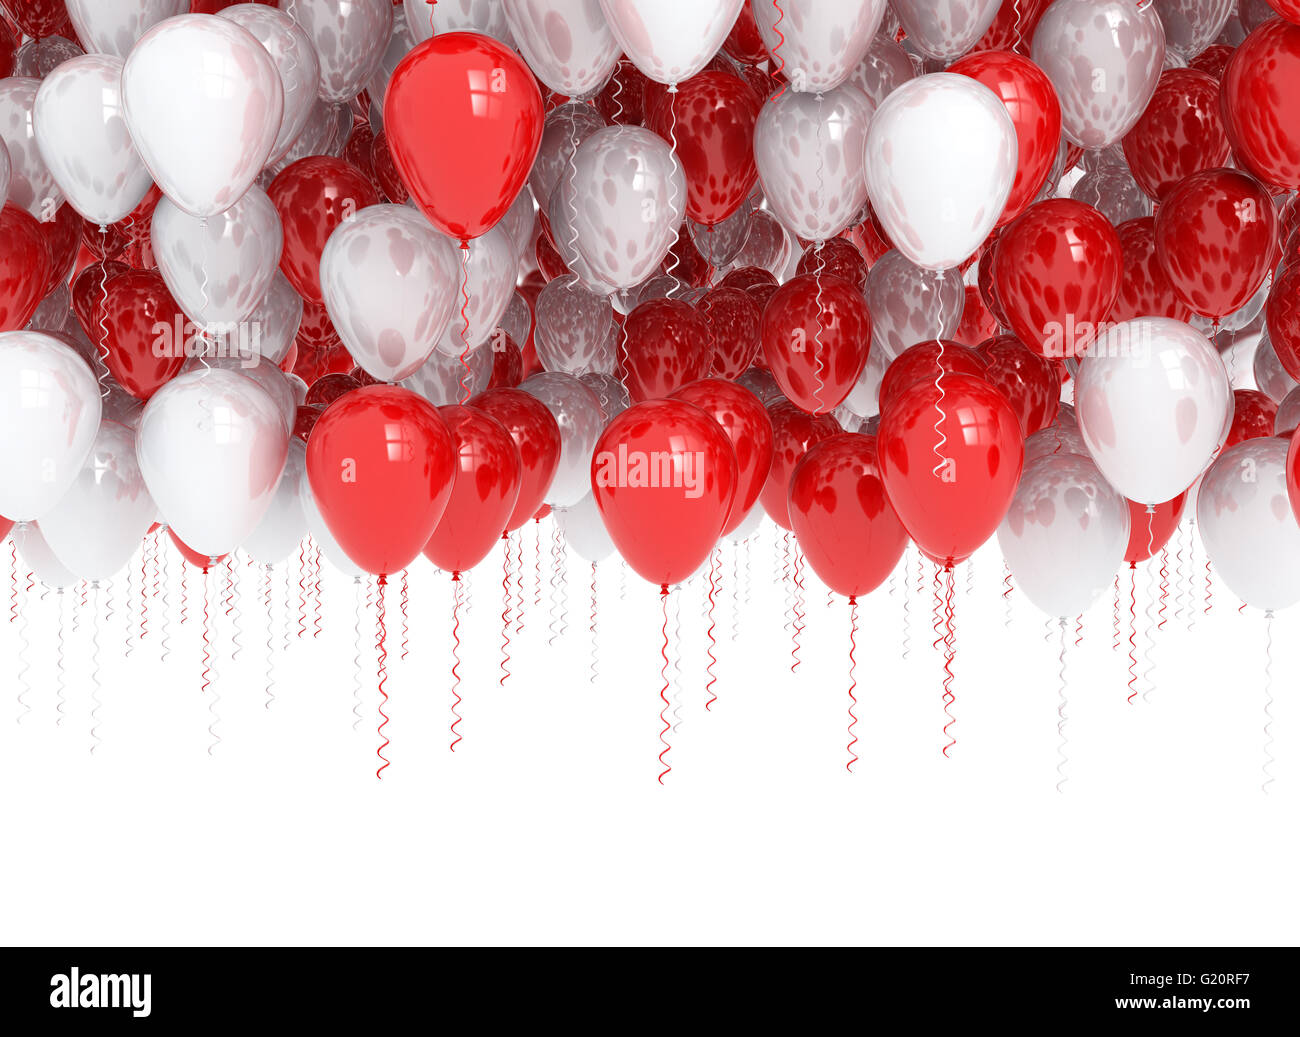 Bunch of red and white party balloons Stock Photo